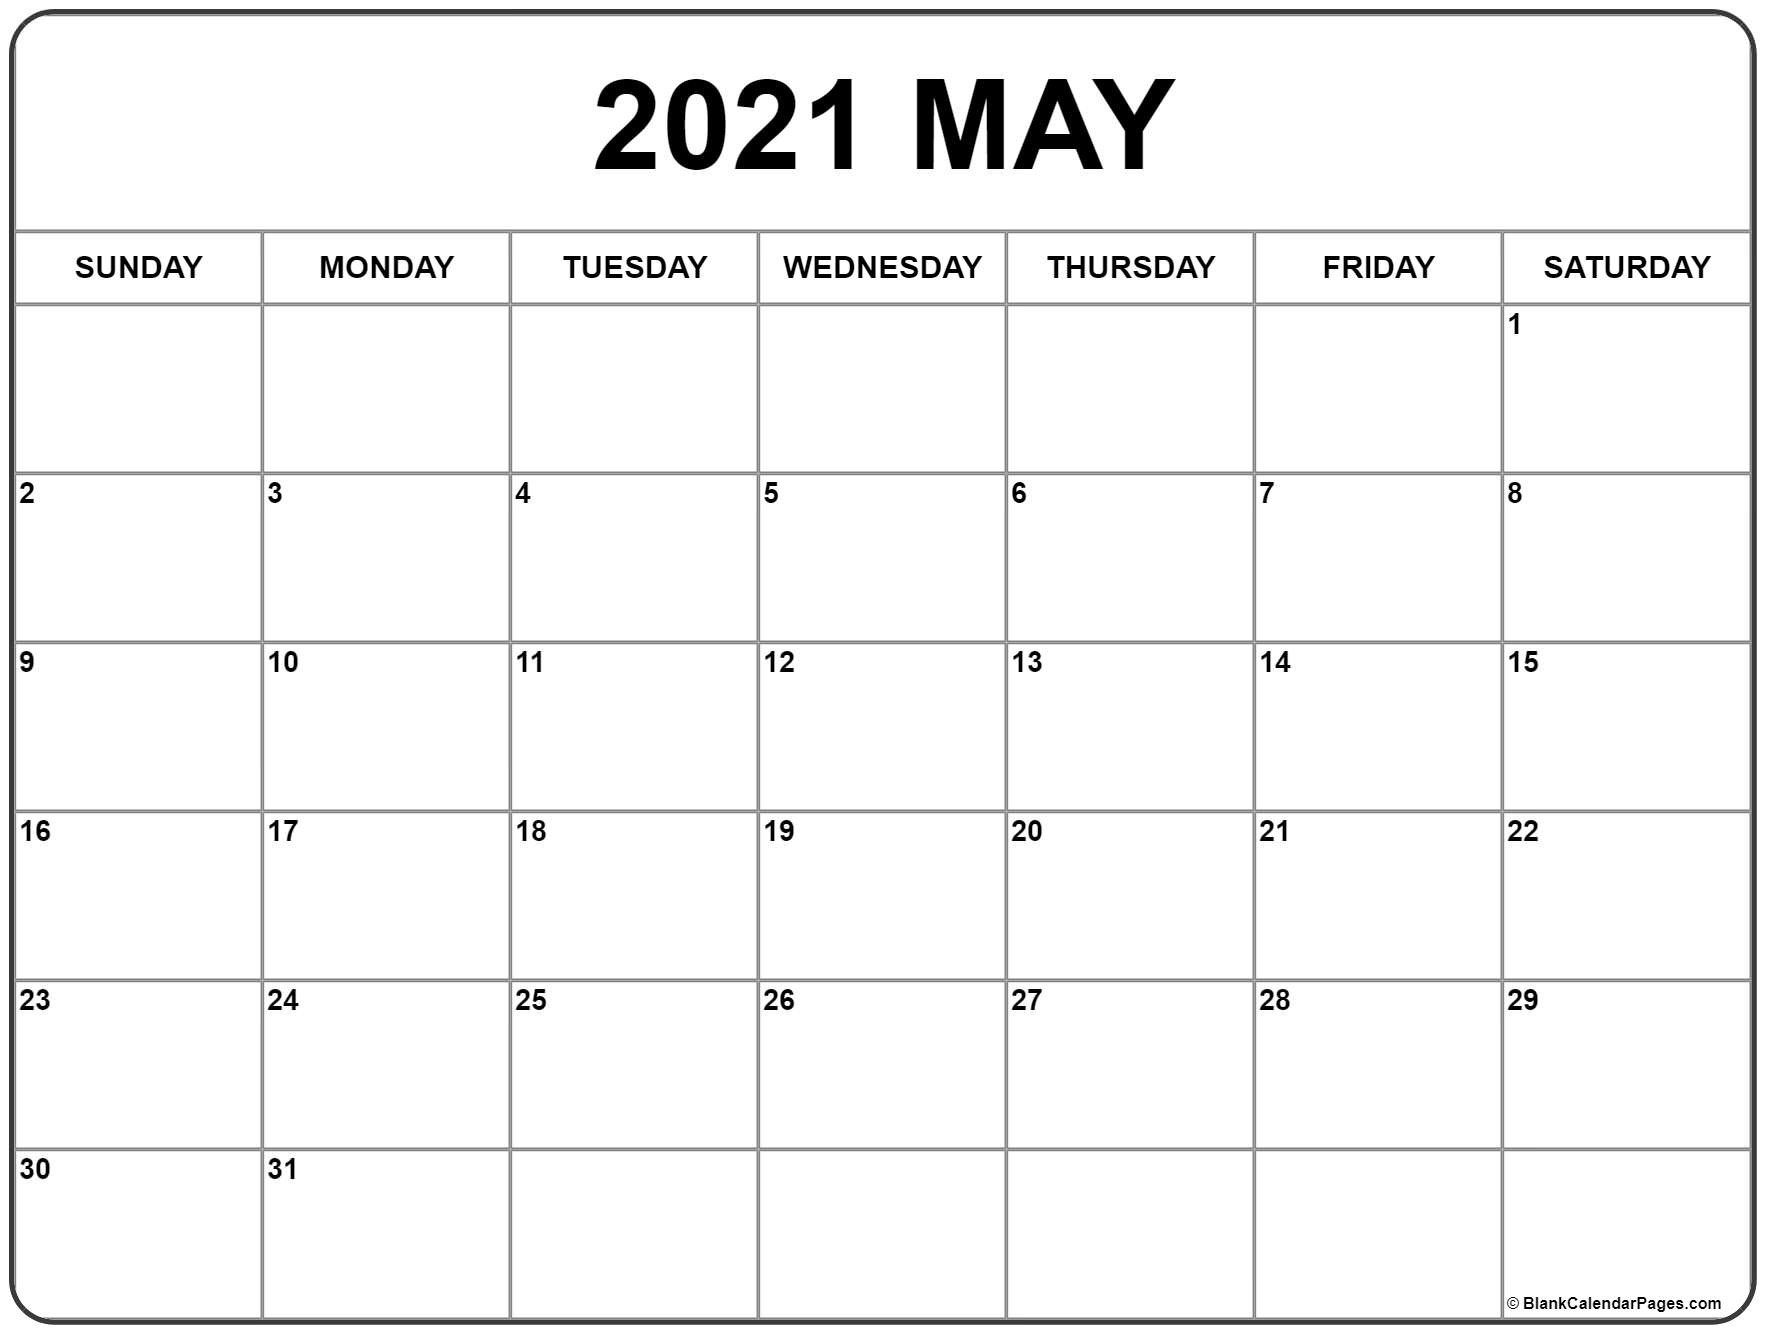 May 2021 Calendar | Free Printable Monthly Calendars-Fill In 2021 Calendar Pages Blank